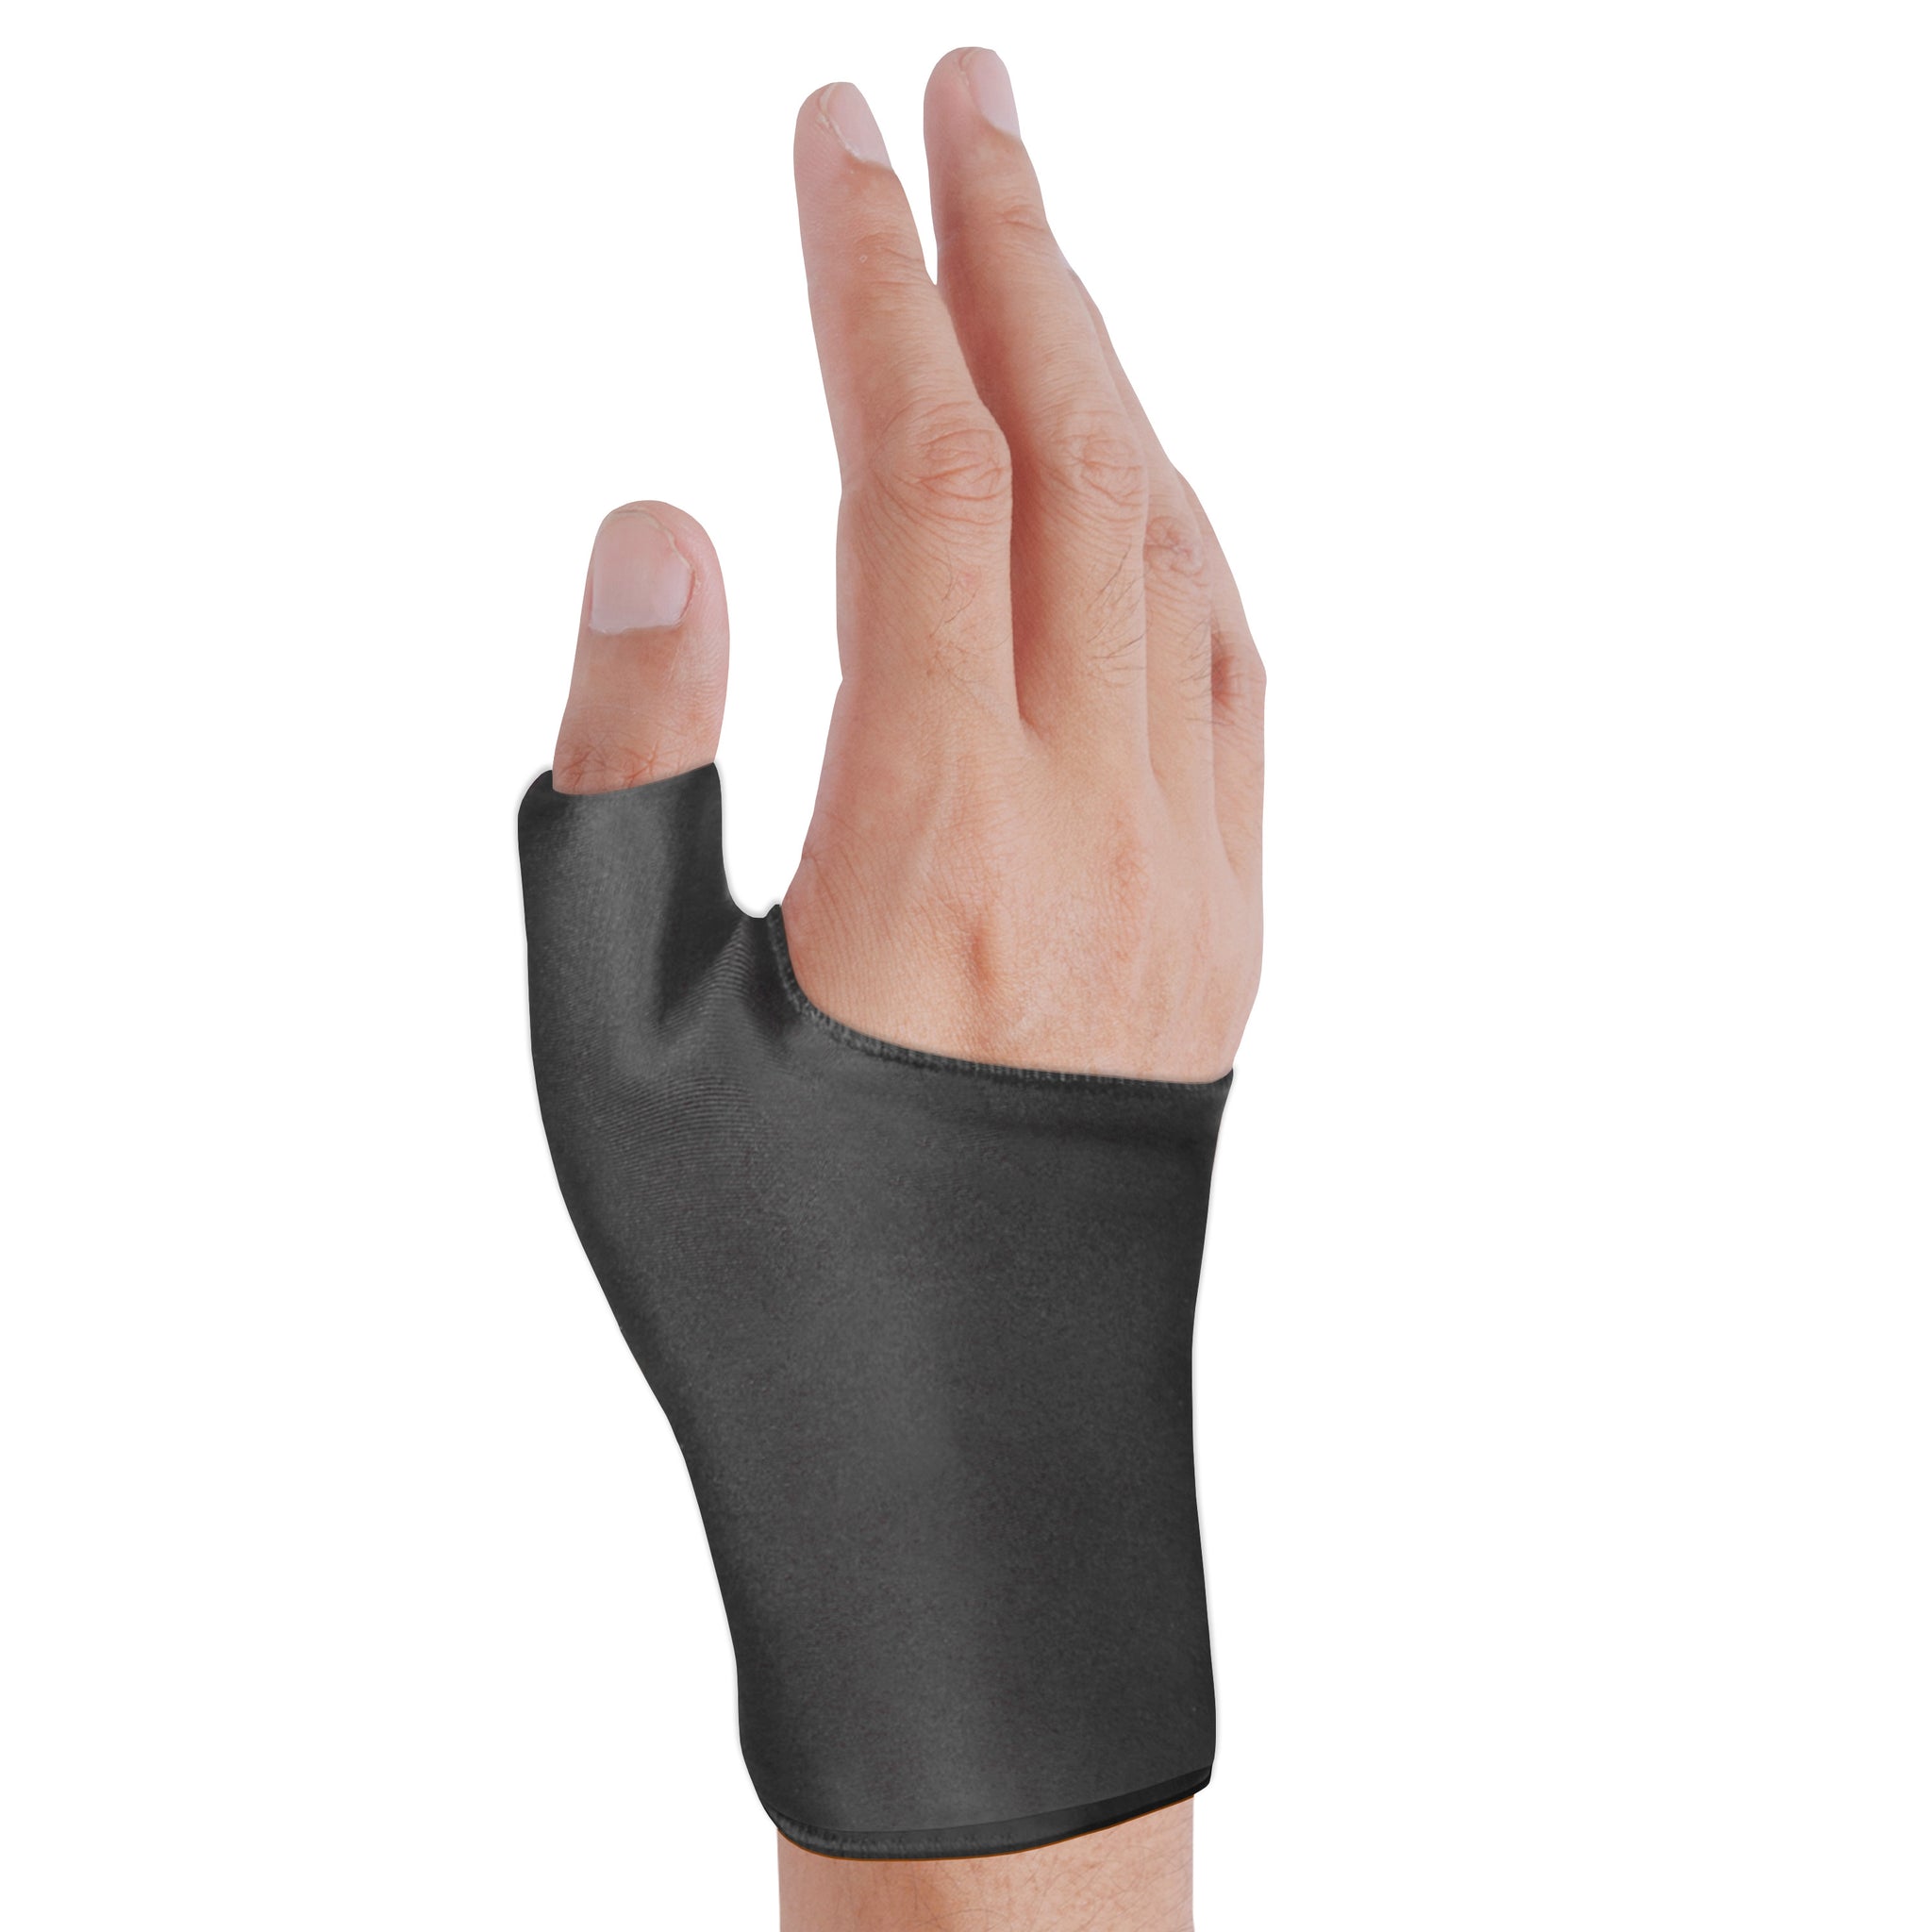 --2568_GEL SLEEVE FOR WRIST AND THUMB_MAIN PRODUCT IMAGE--